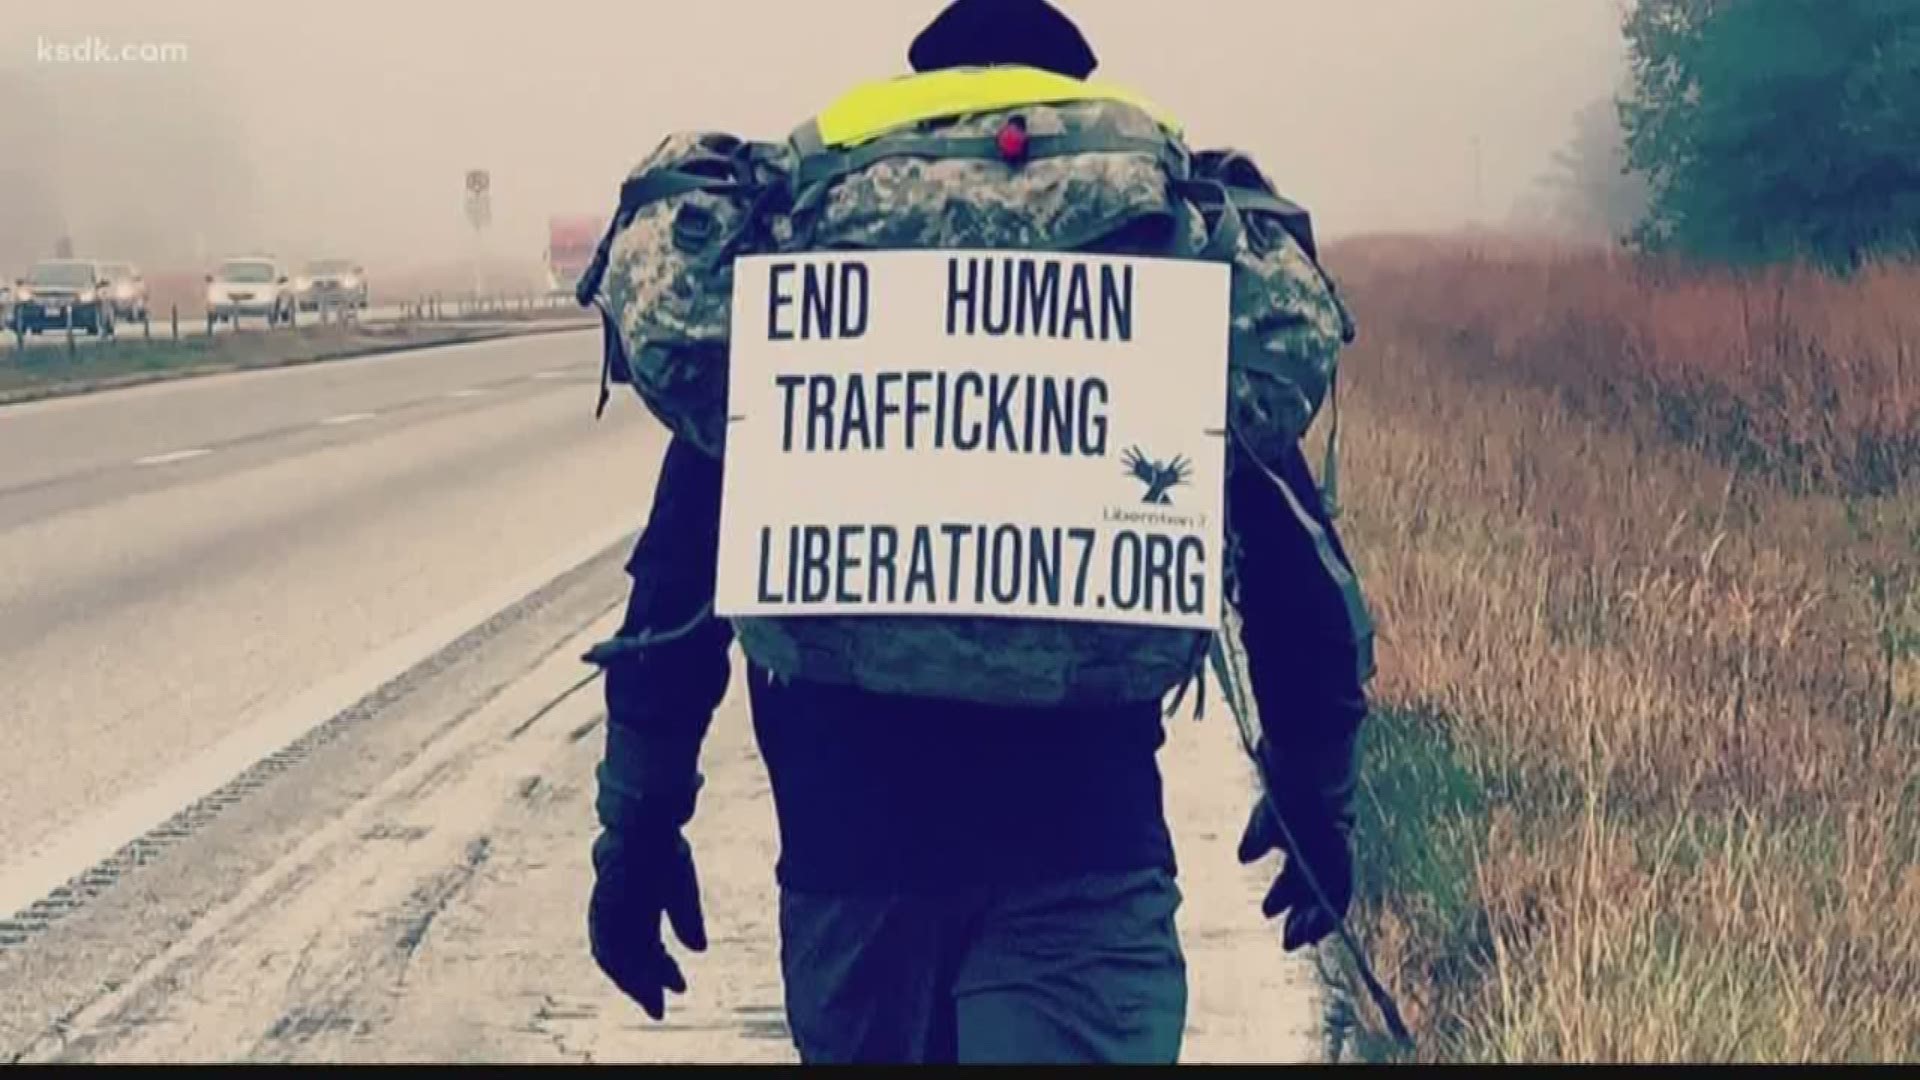 A veteran is walking more than 200 miles to help bring an end to human trafficking.